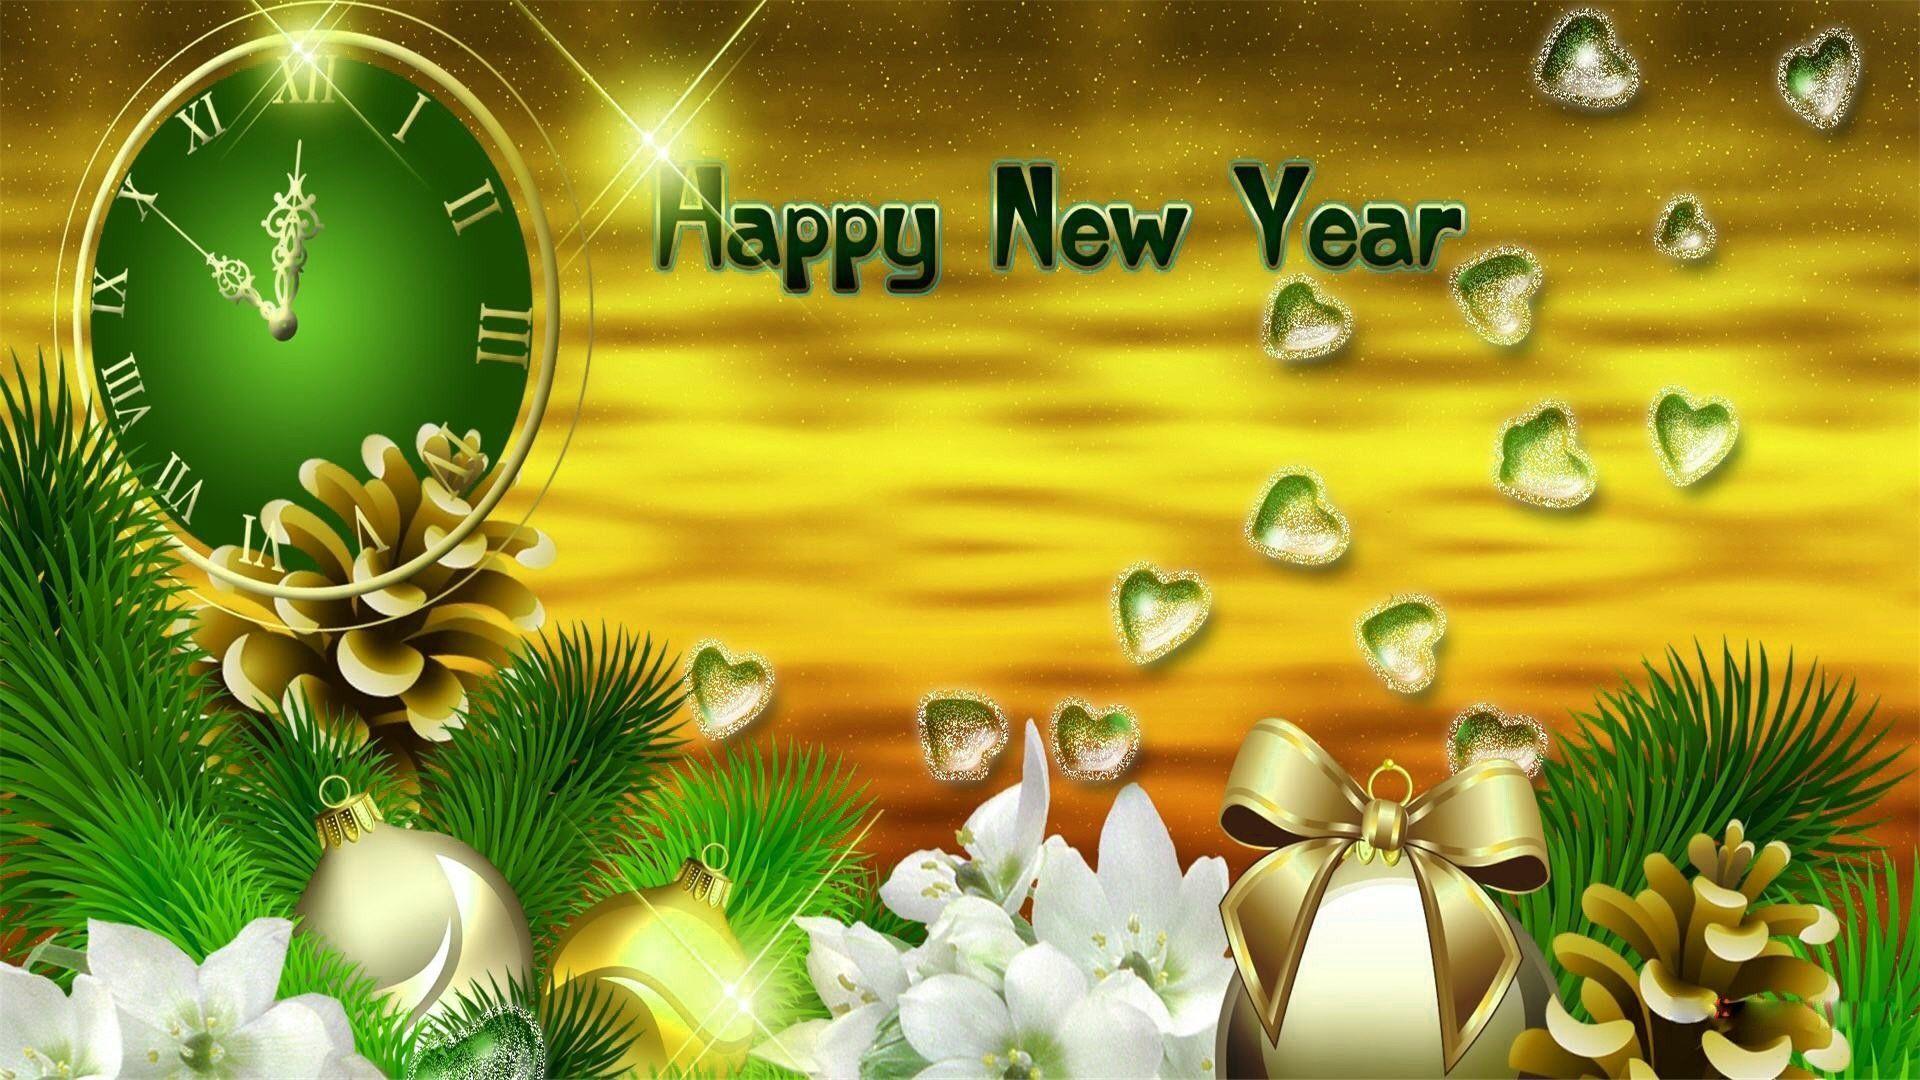 🔥 Free download Happy New Year Wallpapers HD free download [1920x1080